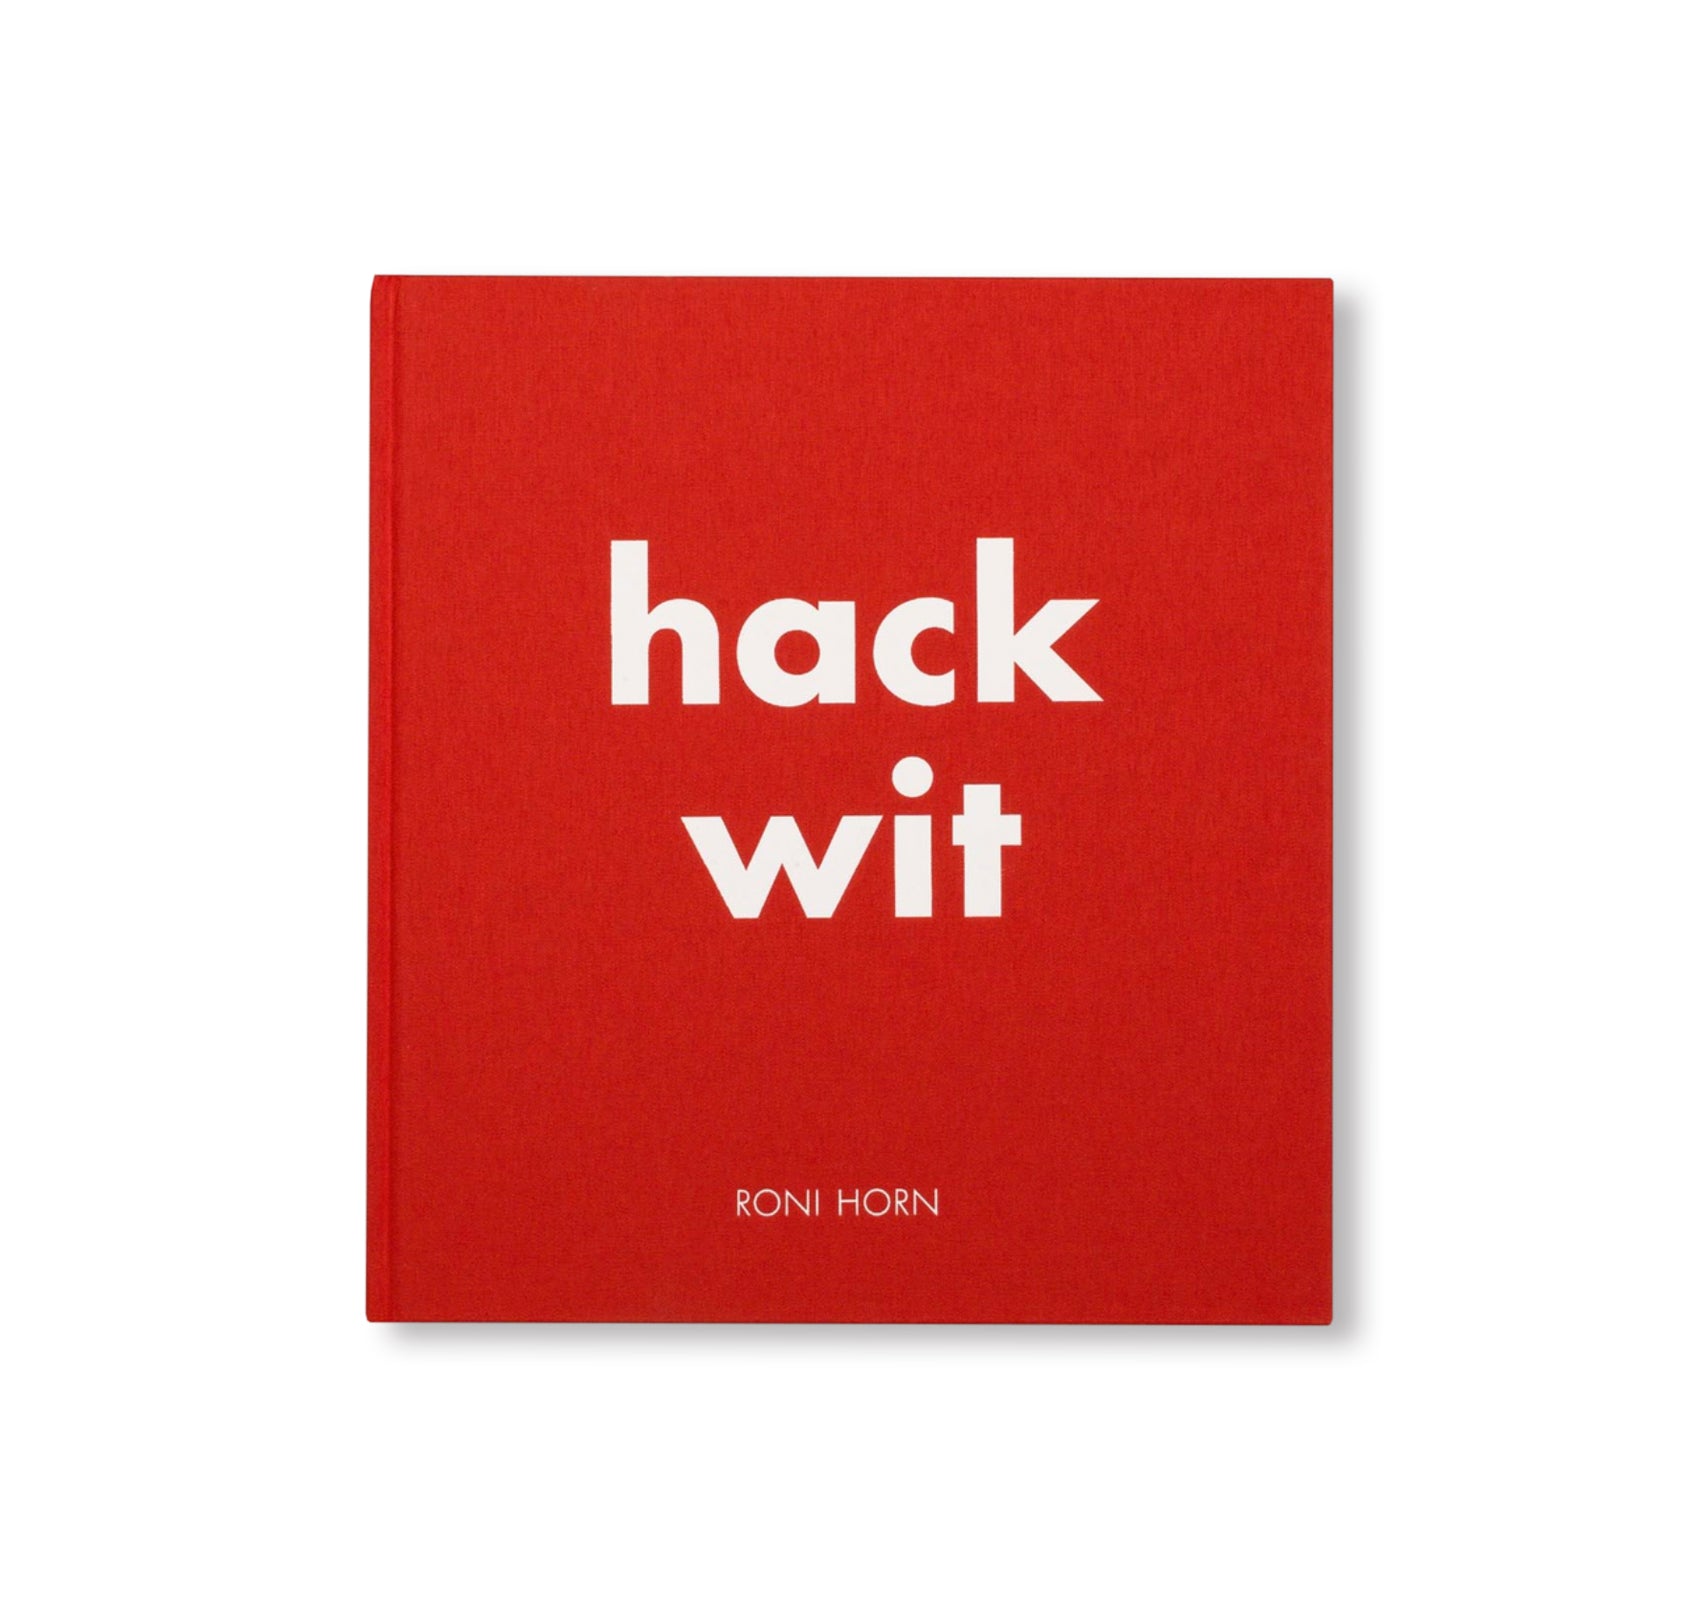 HACK WIT by Roni Horn